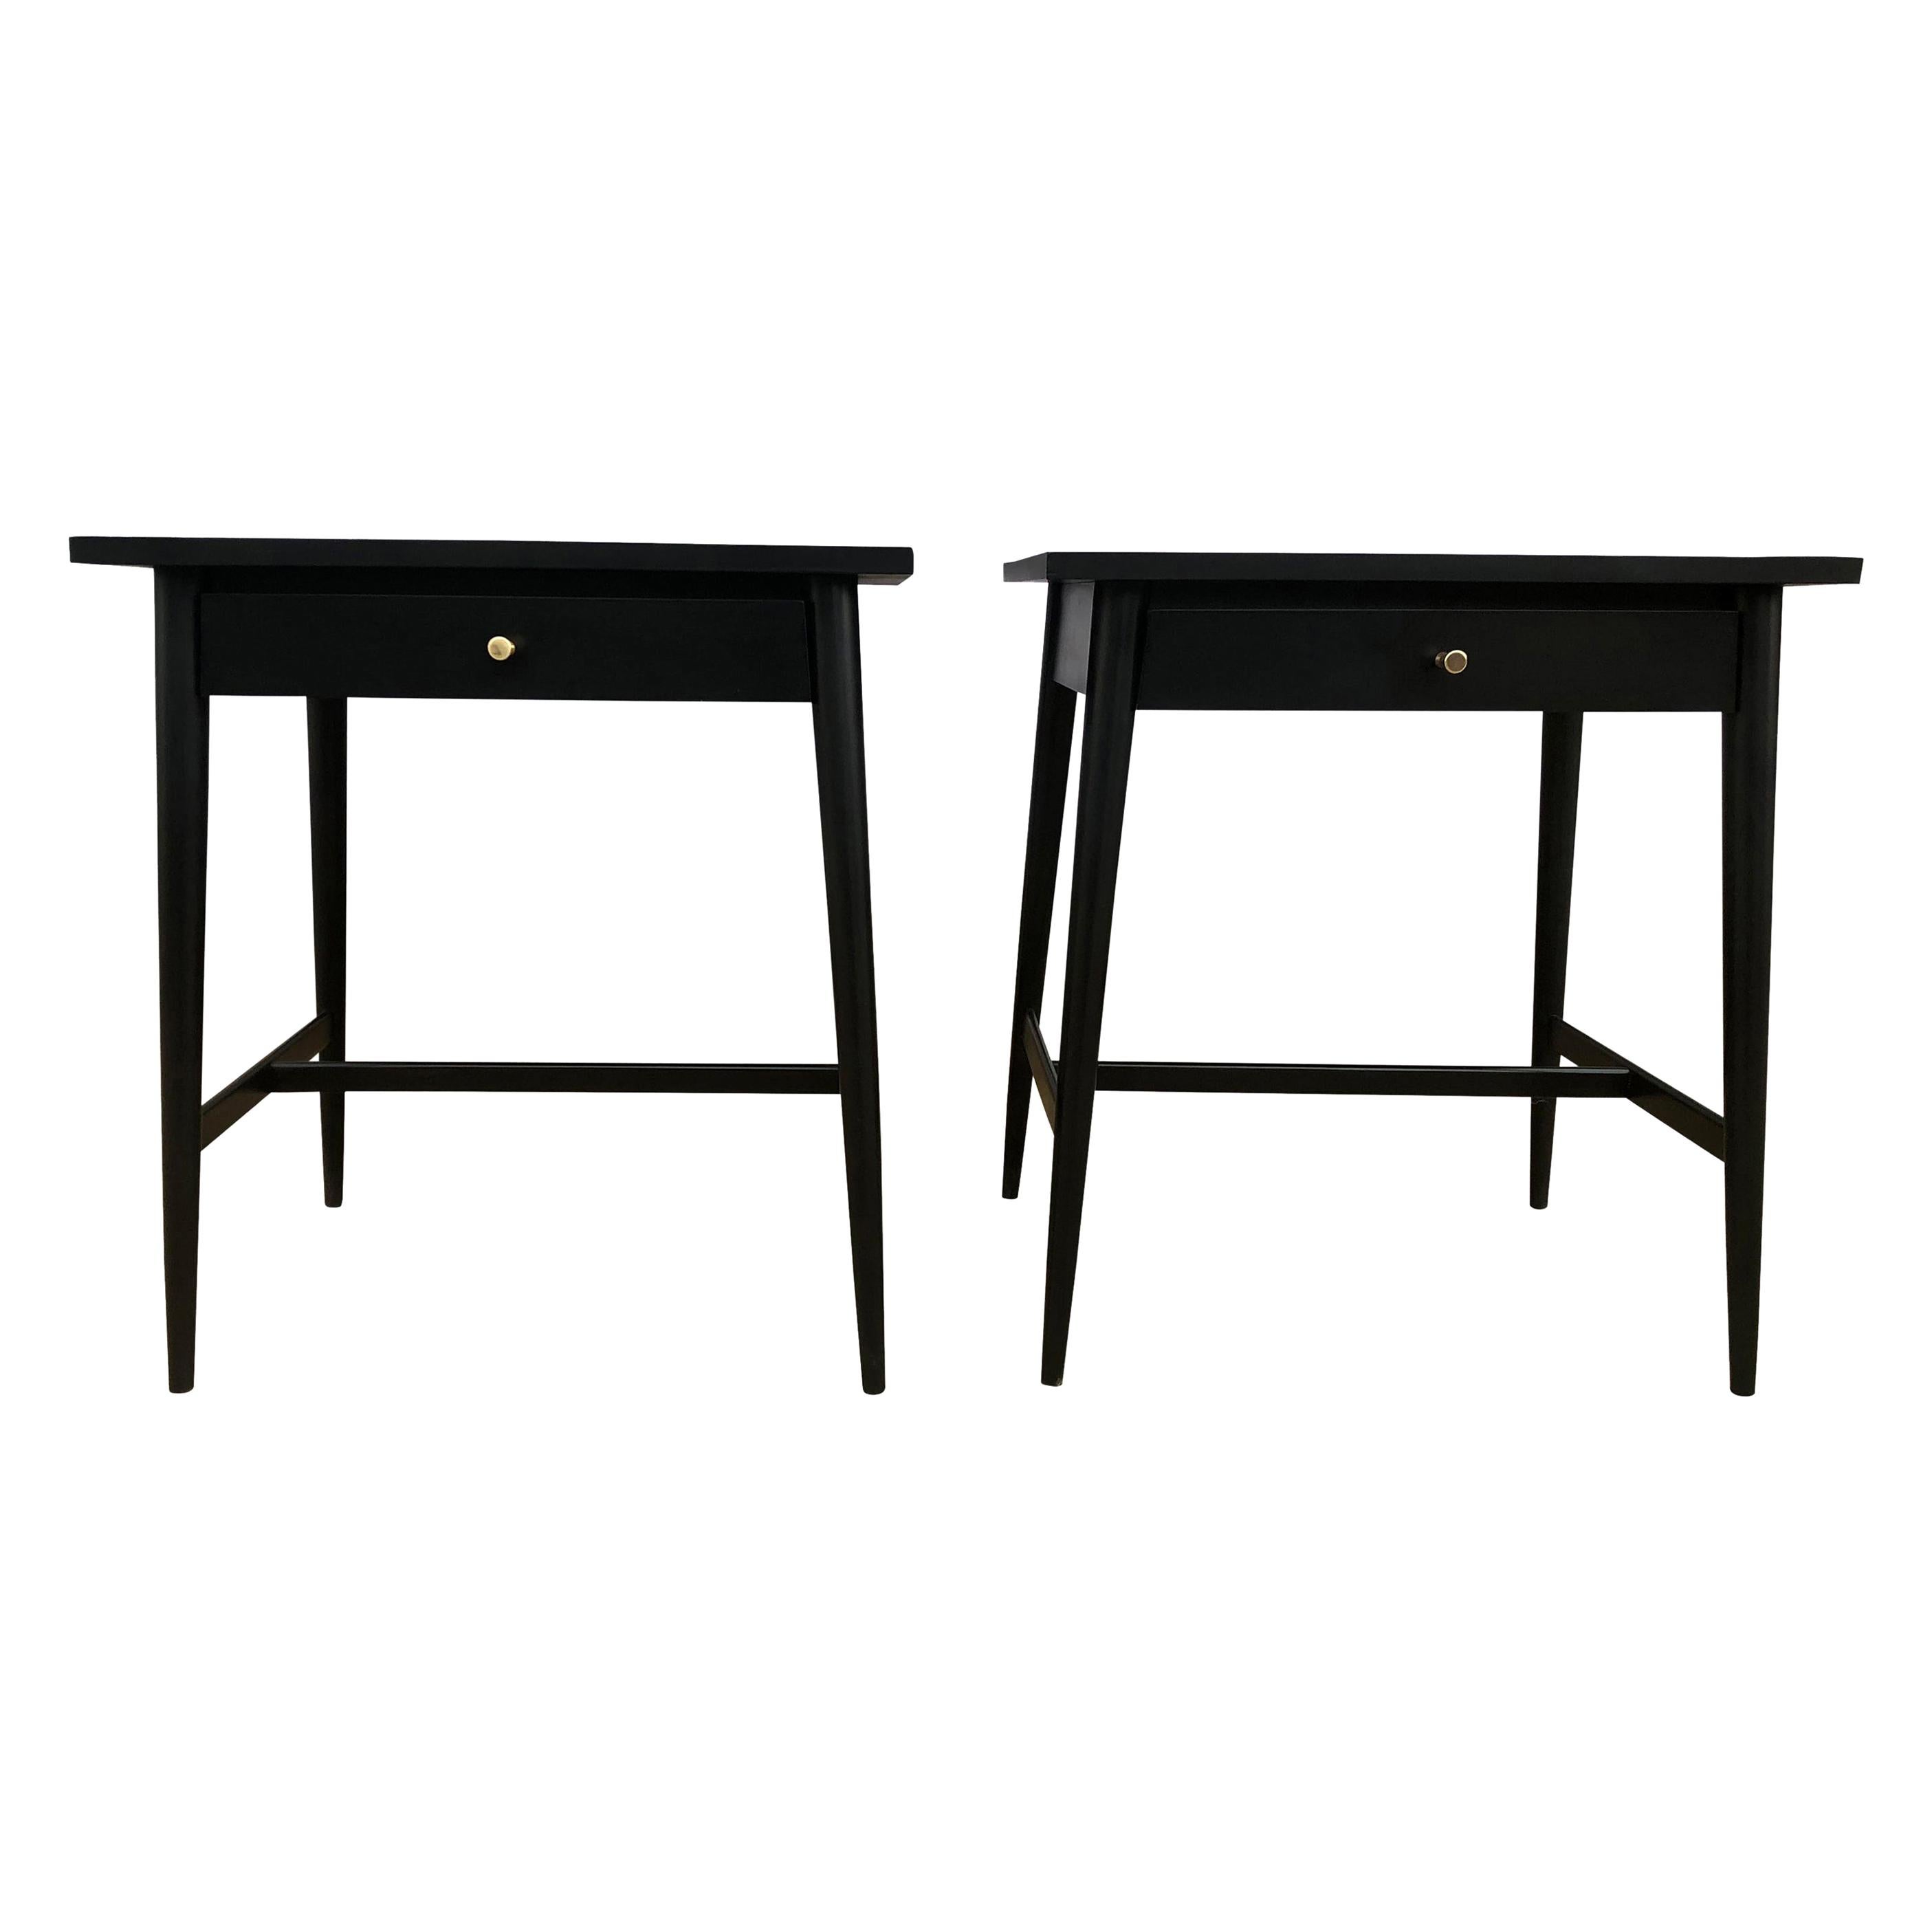 Midcentury Paul McCobb #1586 Nightstands Black Lacquer Finish Brass Knobs